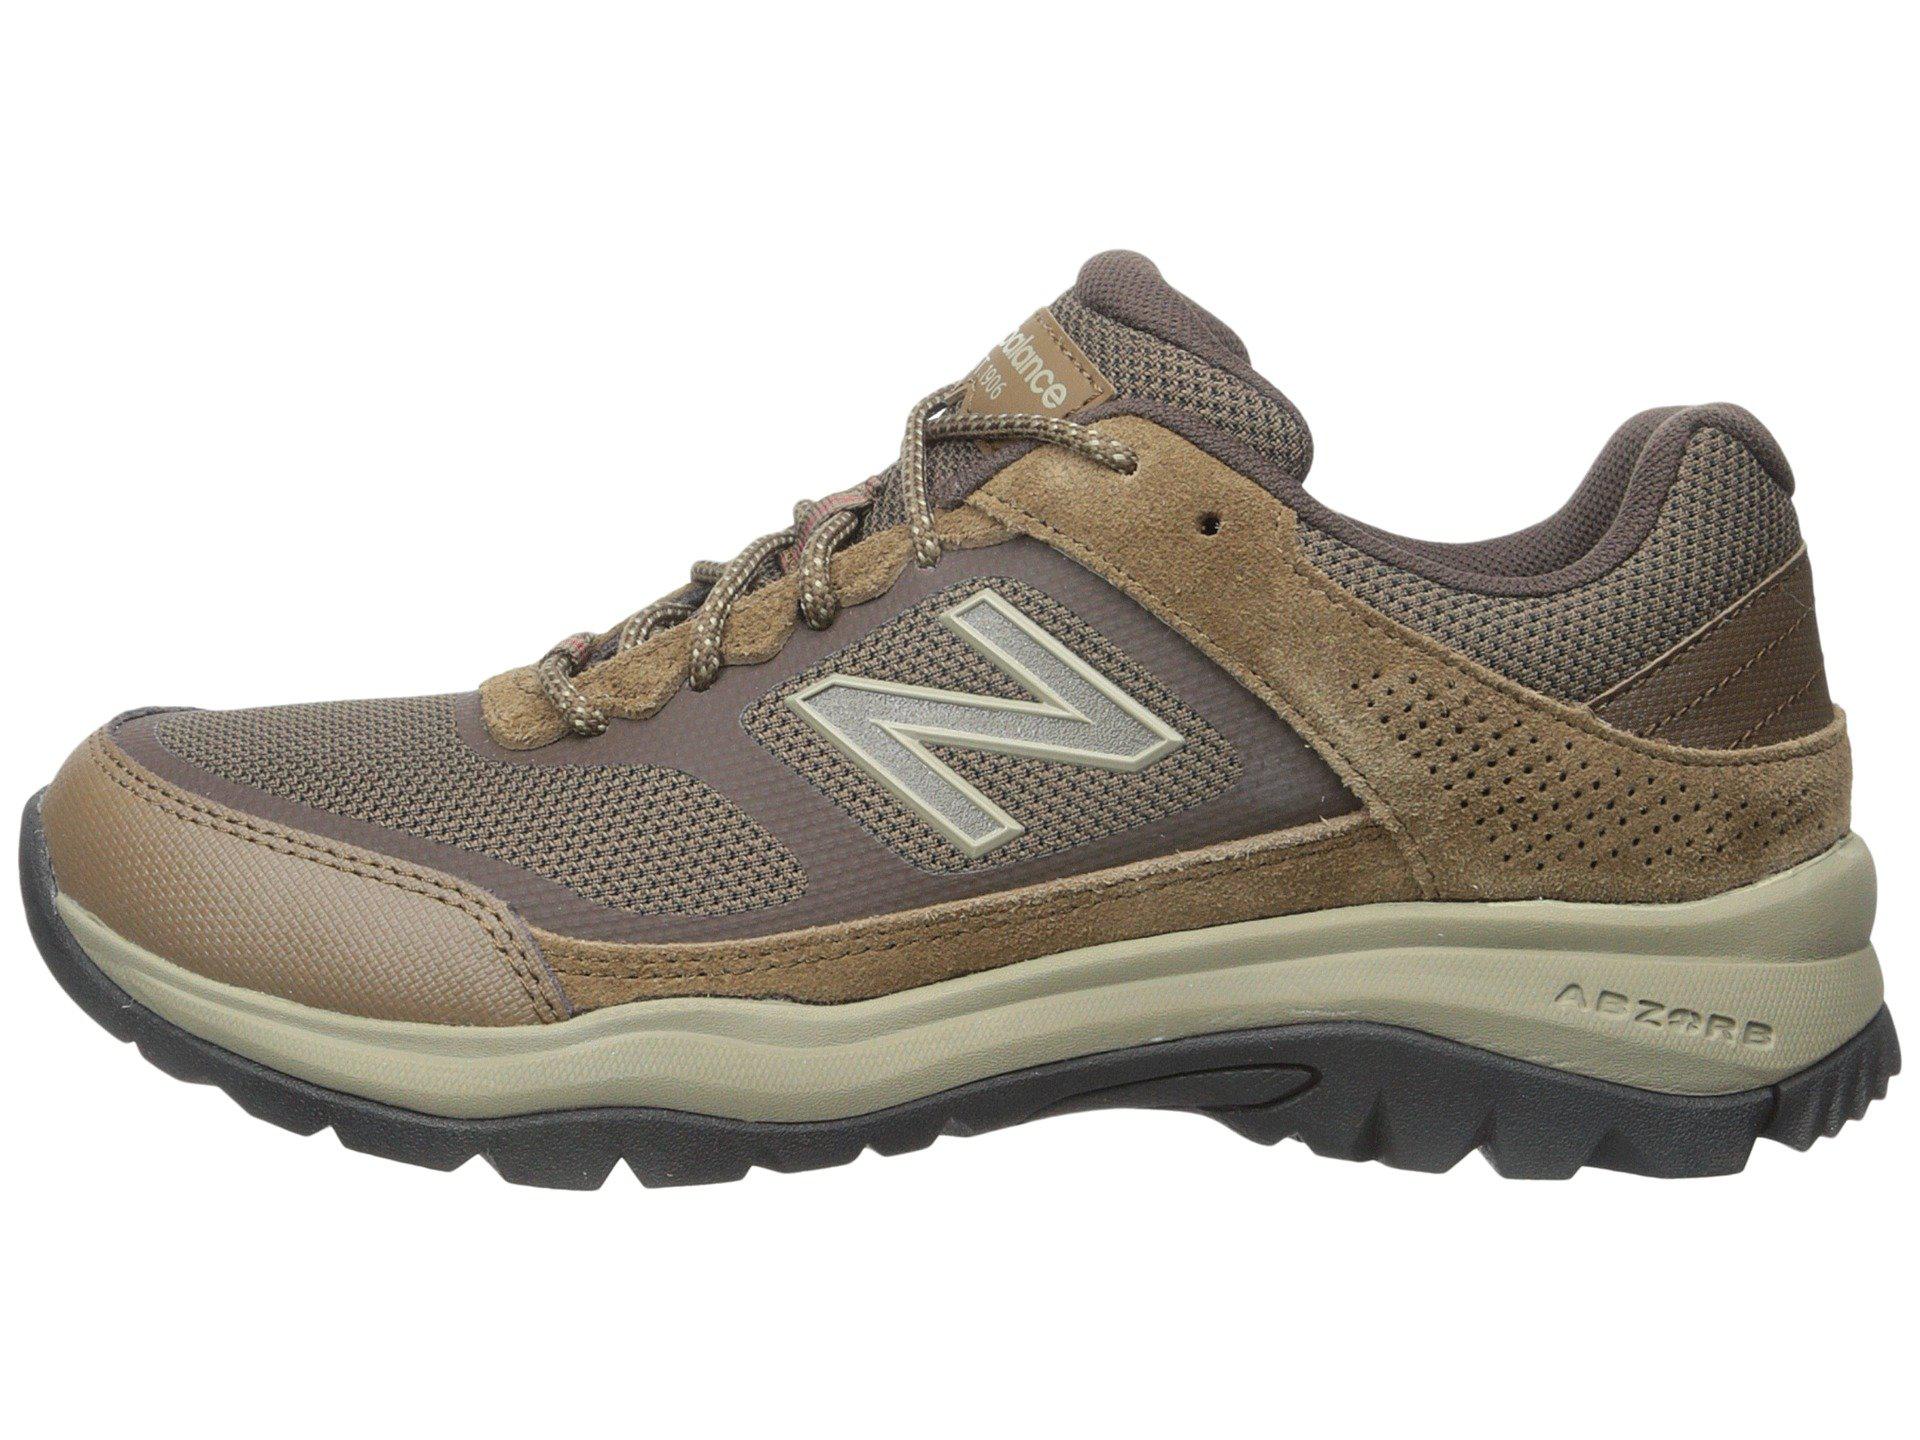 Lyst - New Balance Womens Ww669br Low Top Lace Up Running Sneaker in Brown